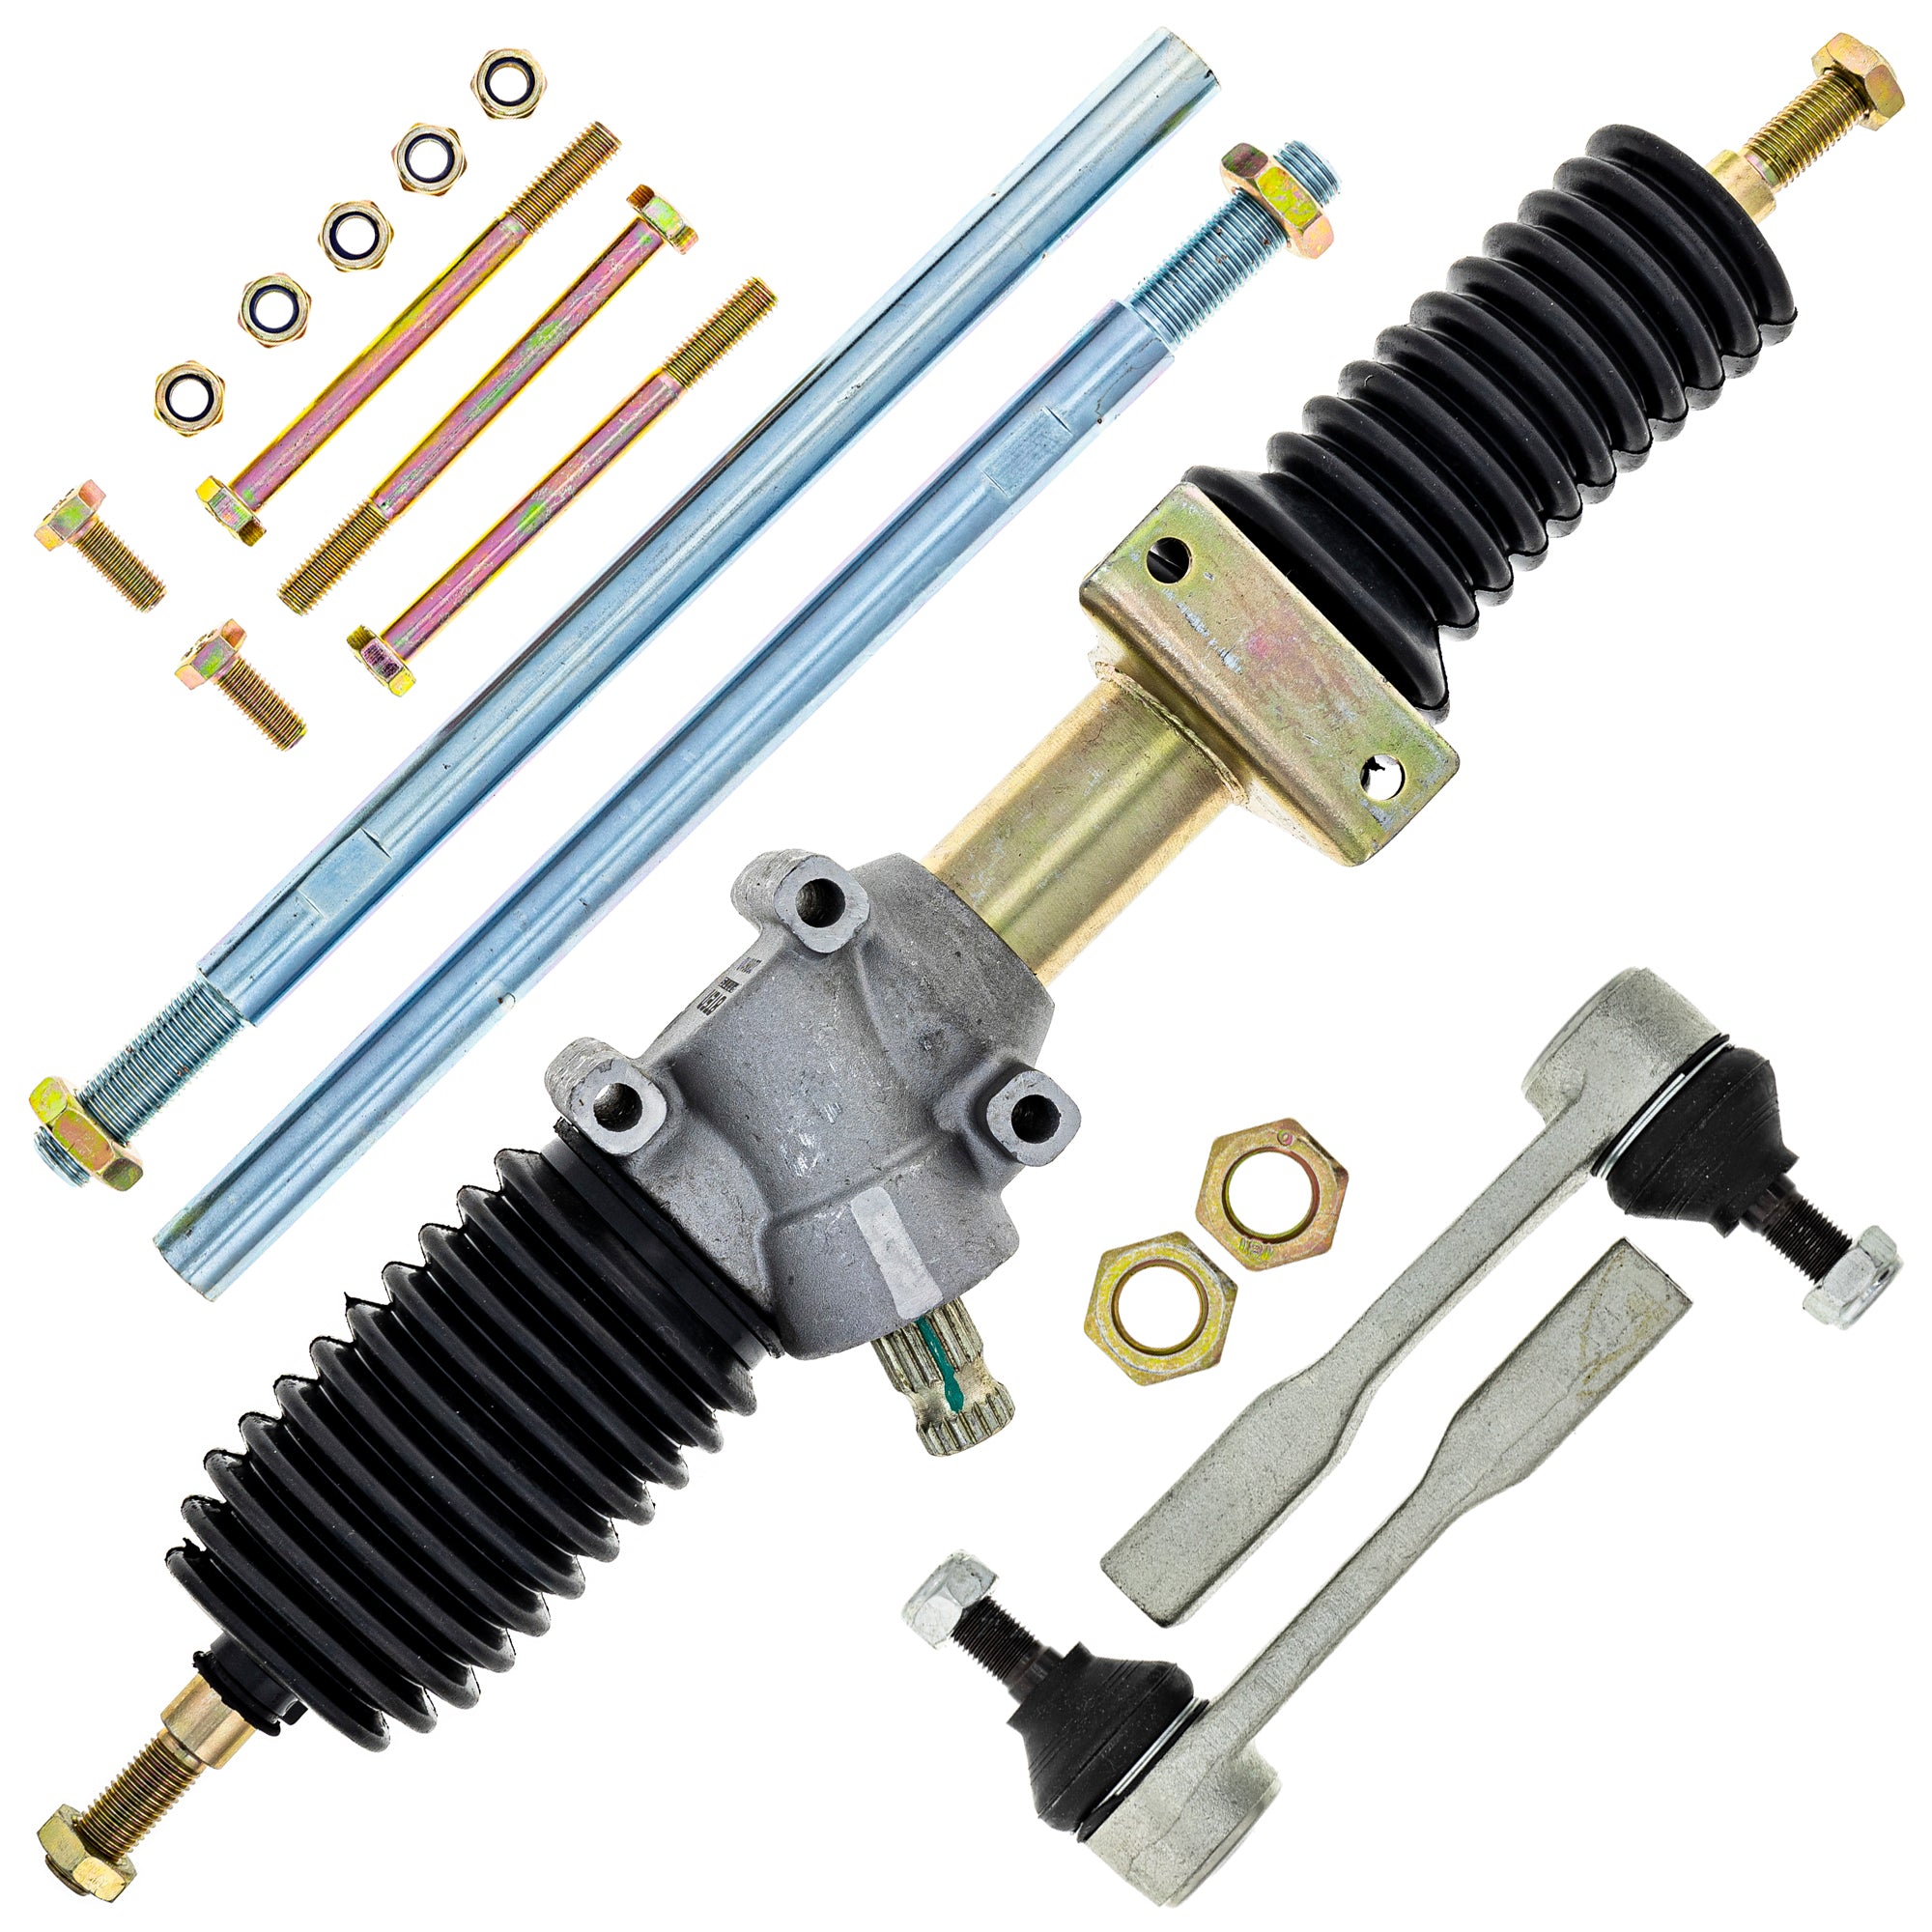 Steering Rack Assembly & Tie Rods Kit for zOTHER Polaris RZR General NICHE MK1009499